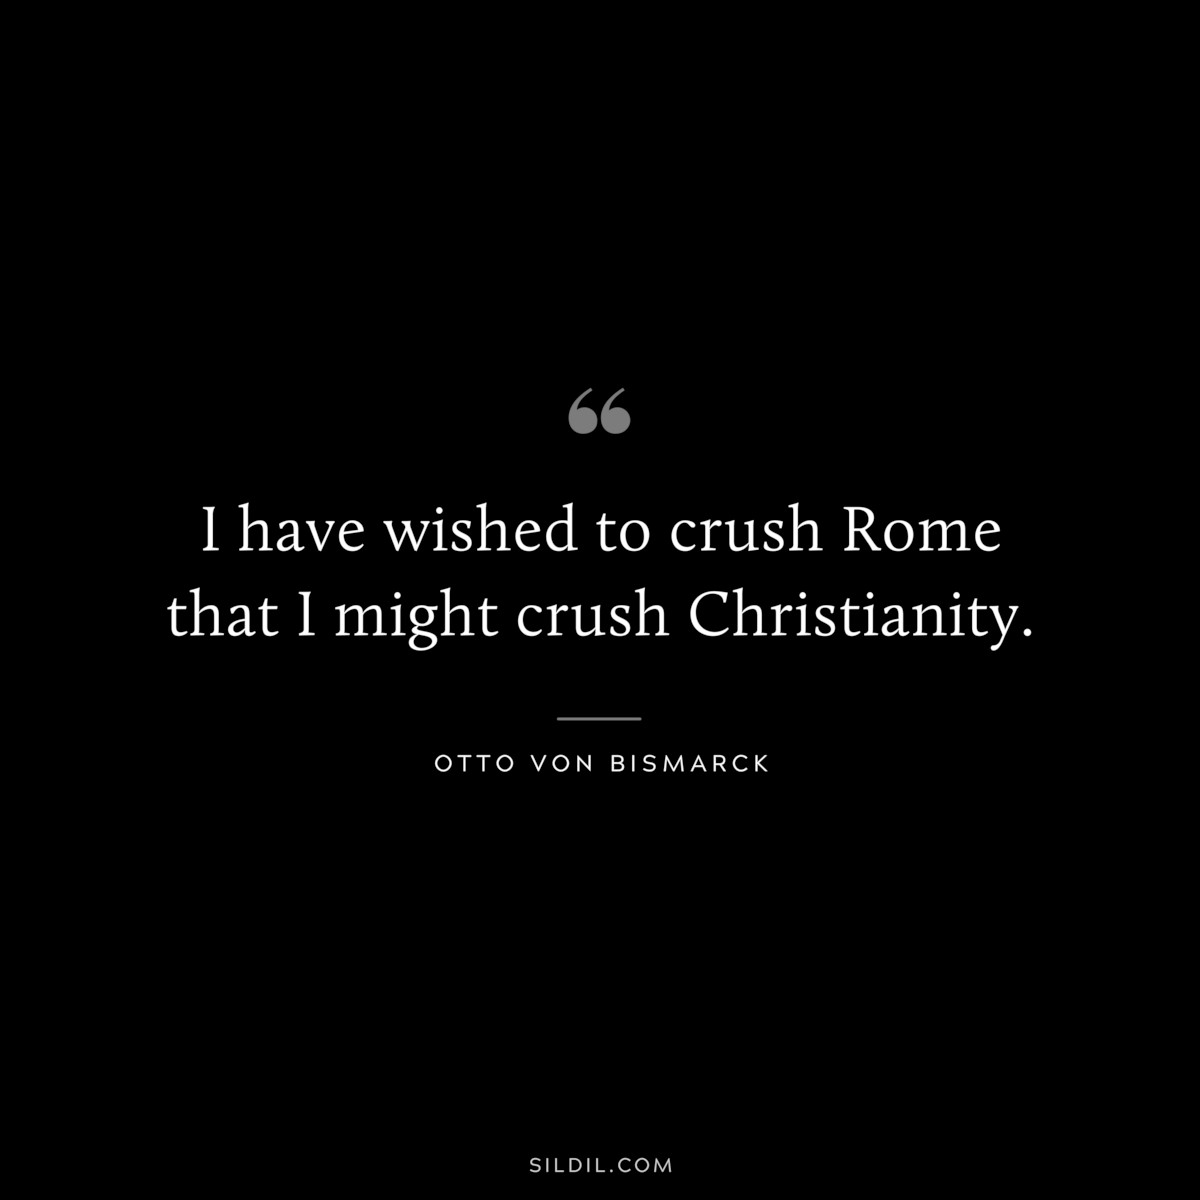 I have wished to crush Rome that I might crush Christianity. ― Otto von Bismarck